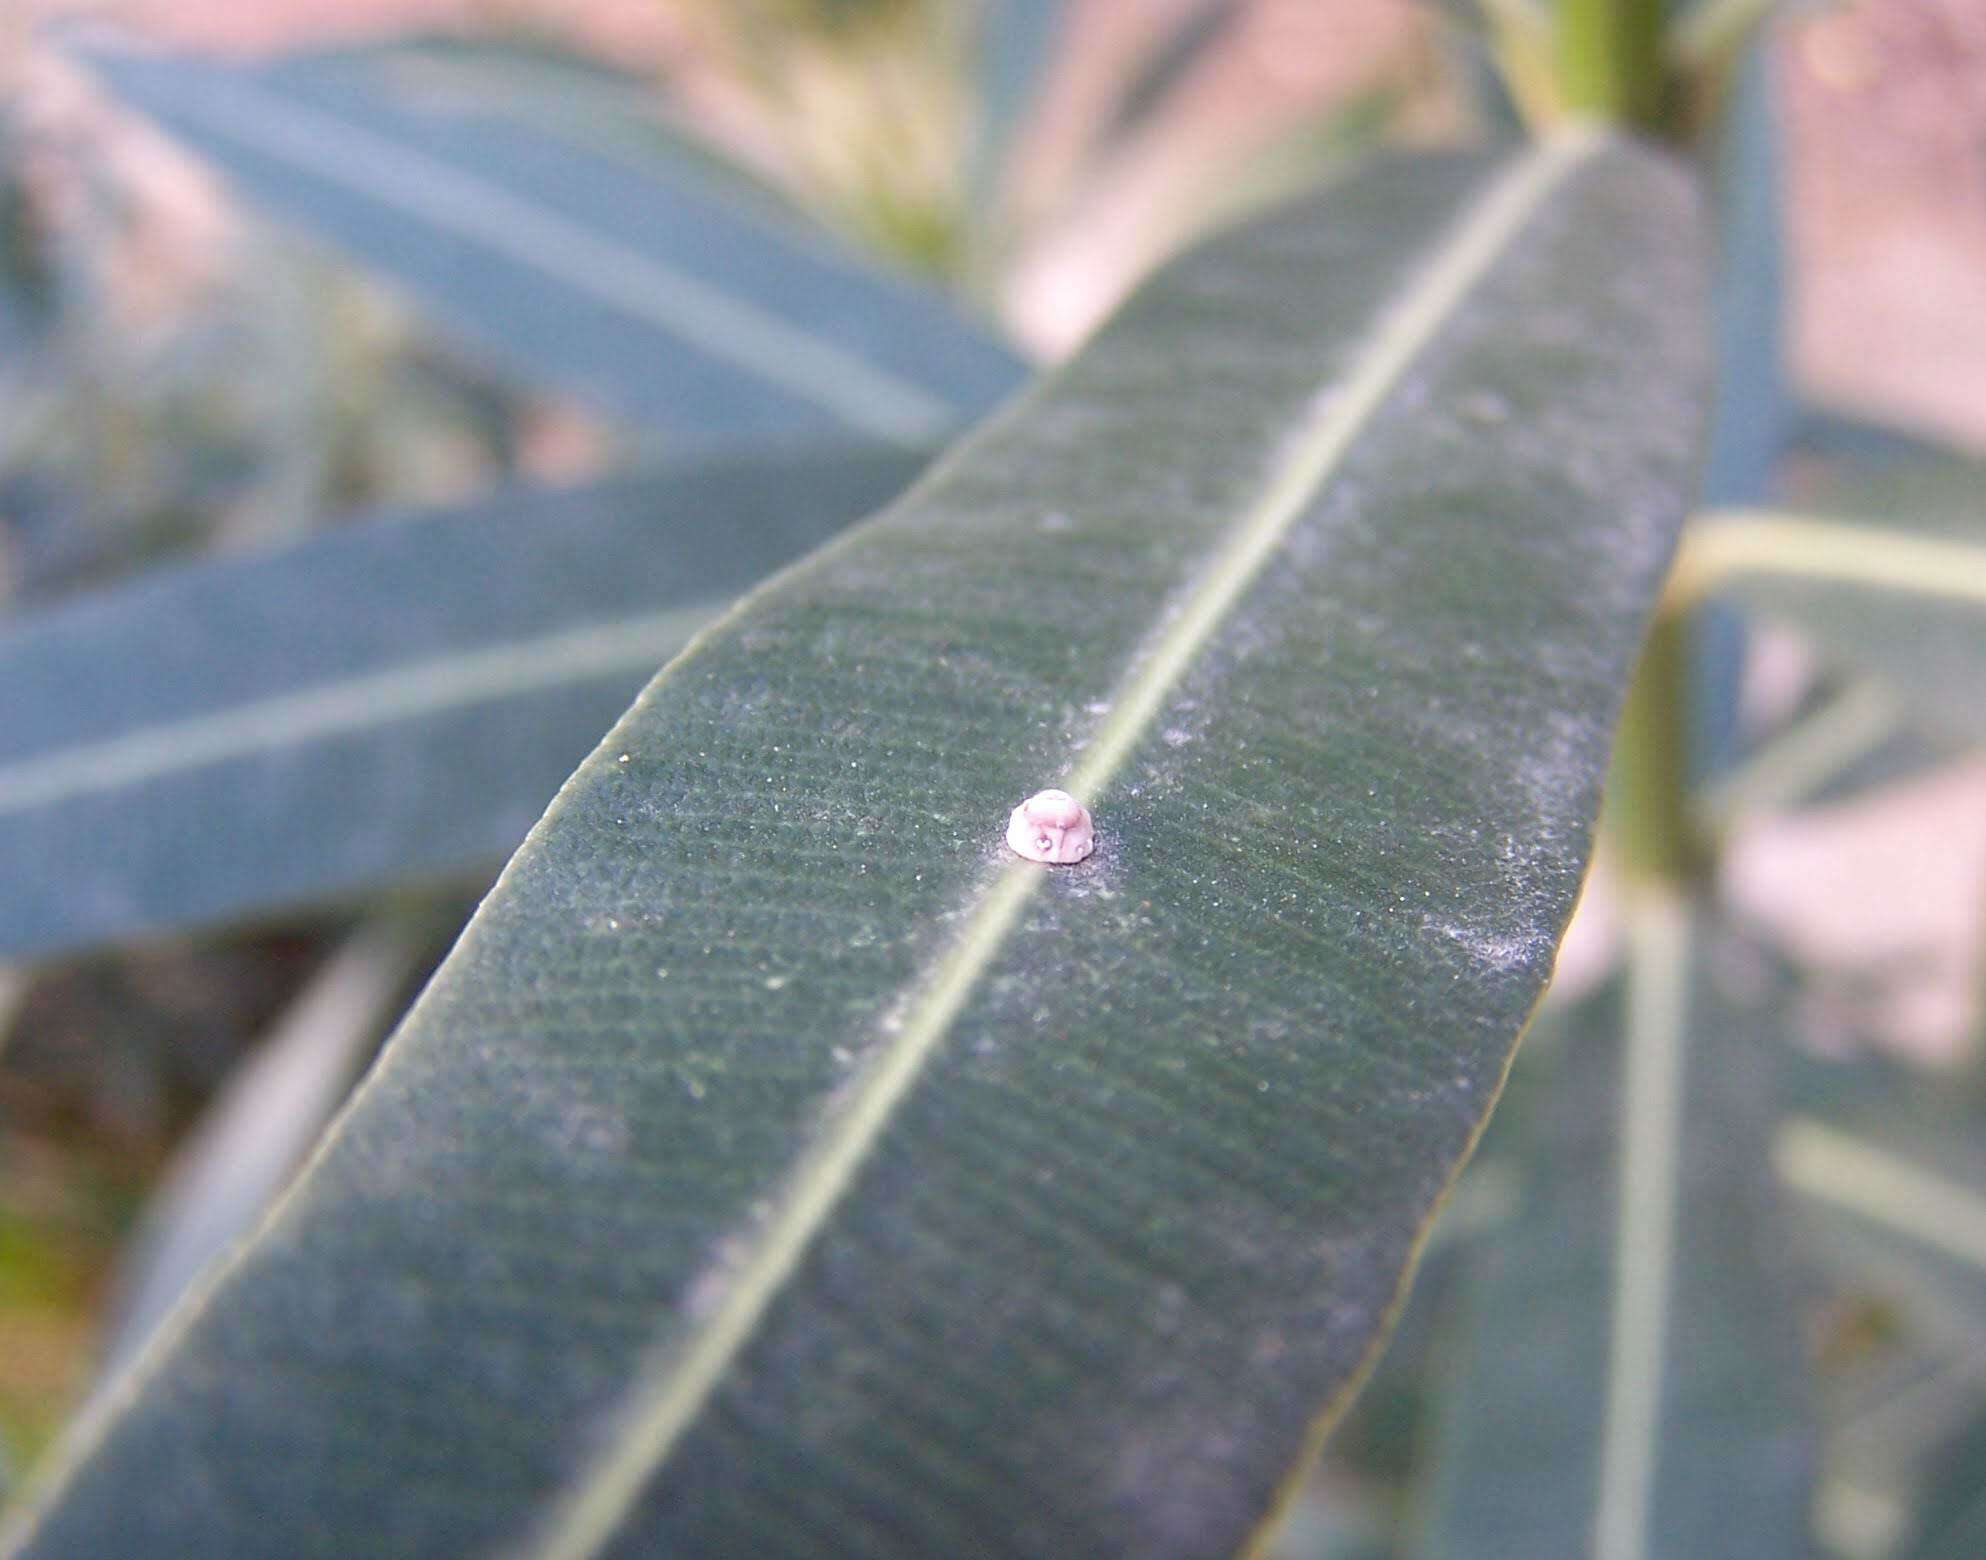 Image of Scale insect